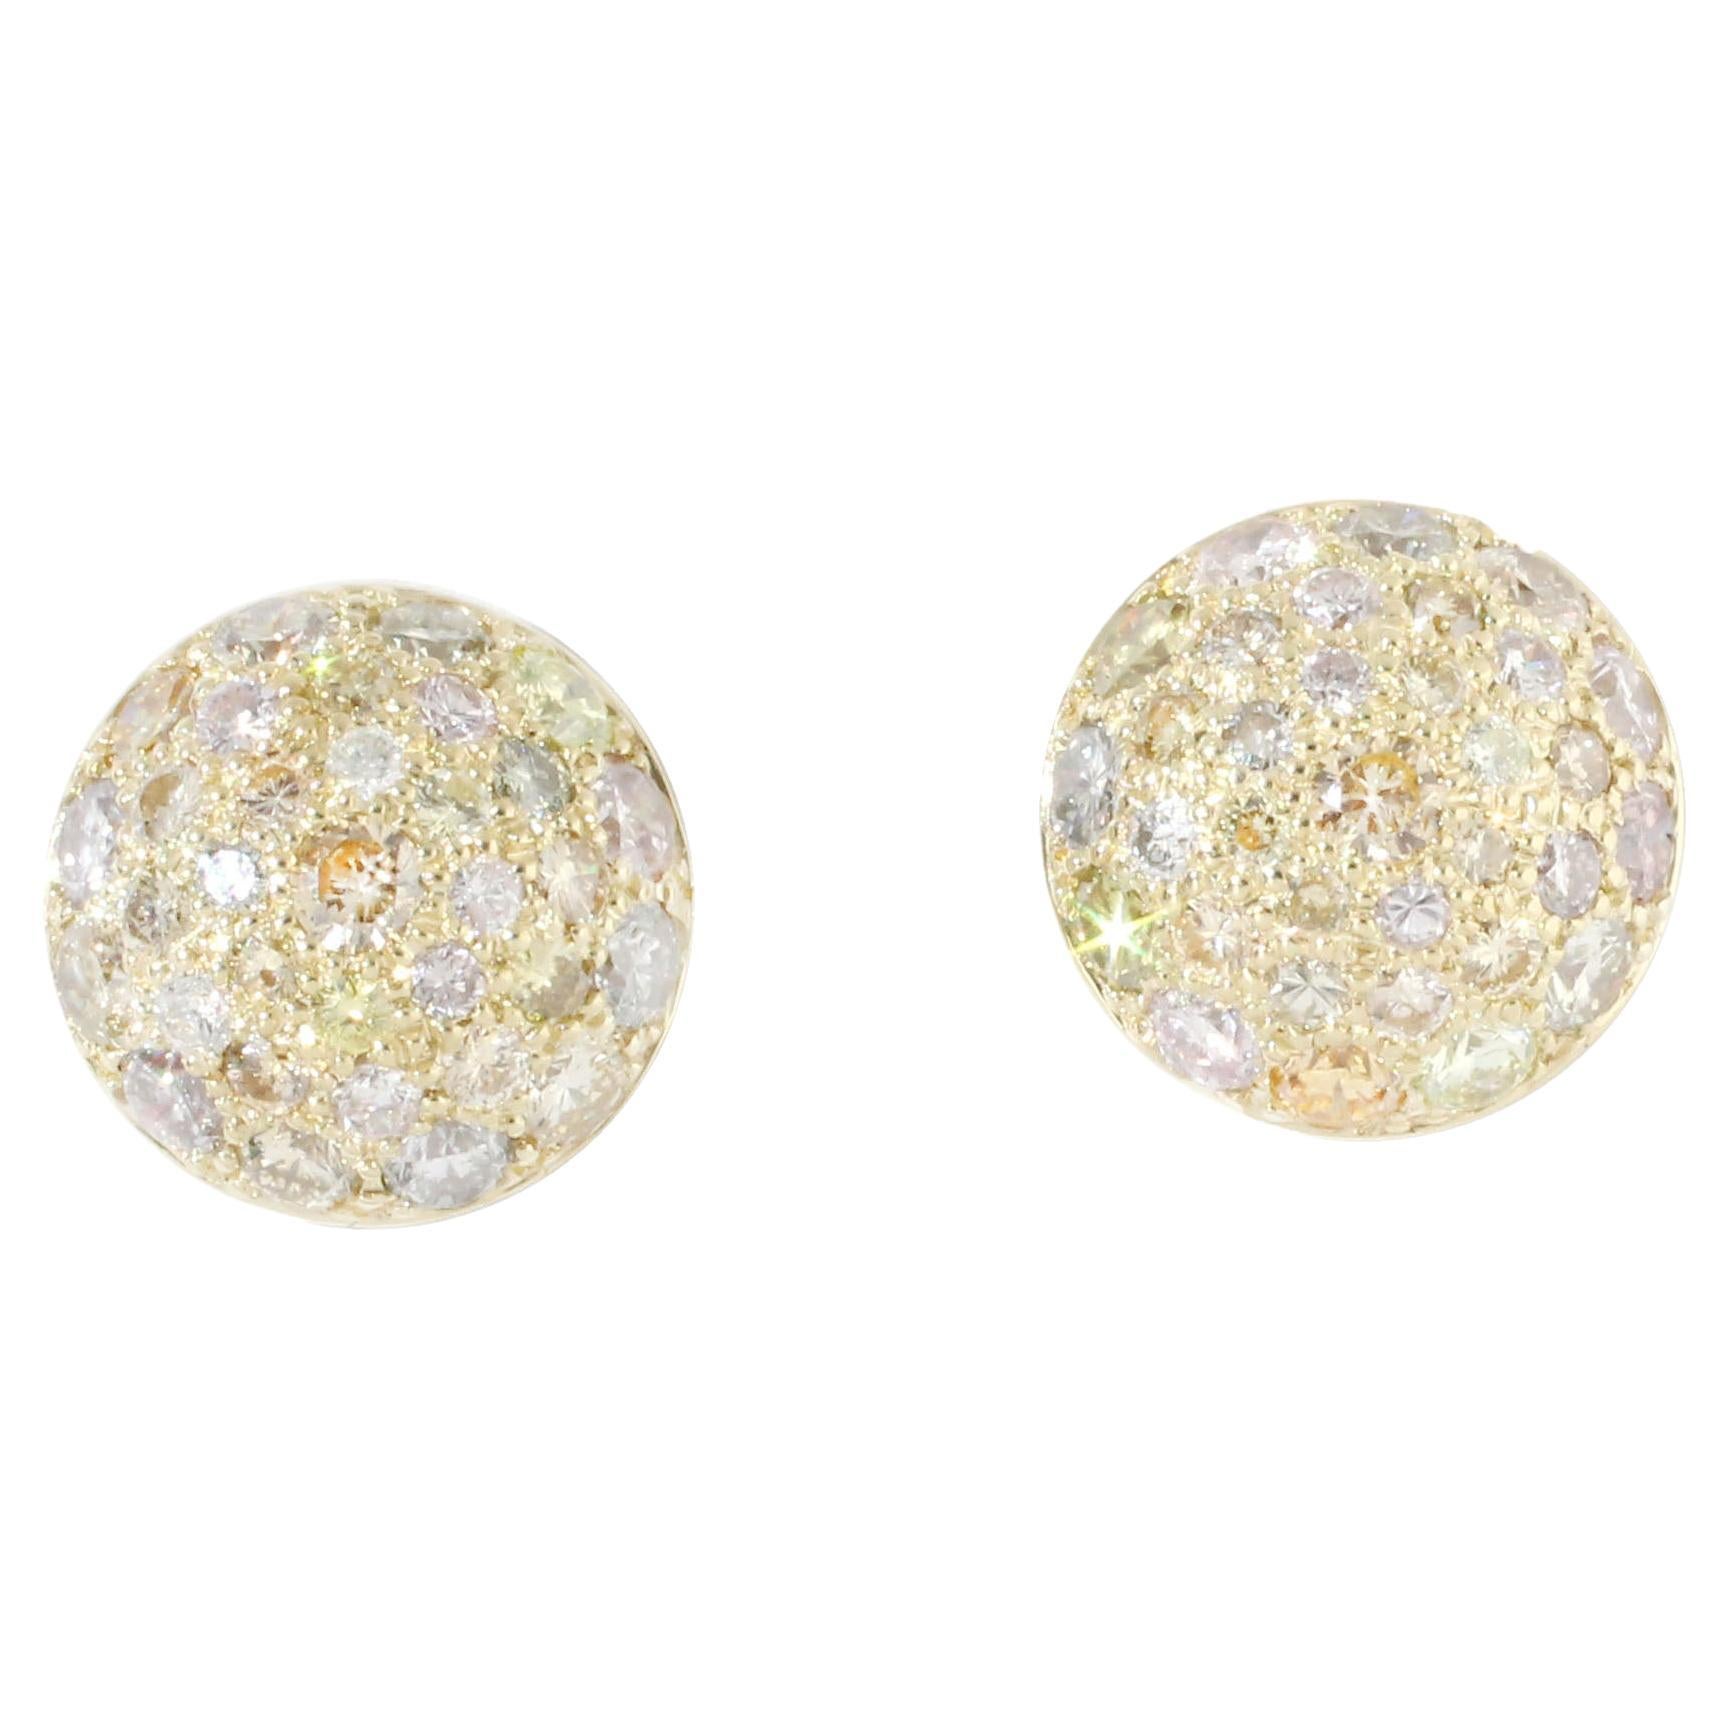 Julius Cohen Champagne Diamond Dome Earrings in 18 Kt Gold For Sale